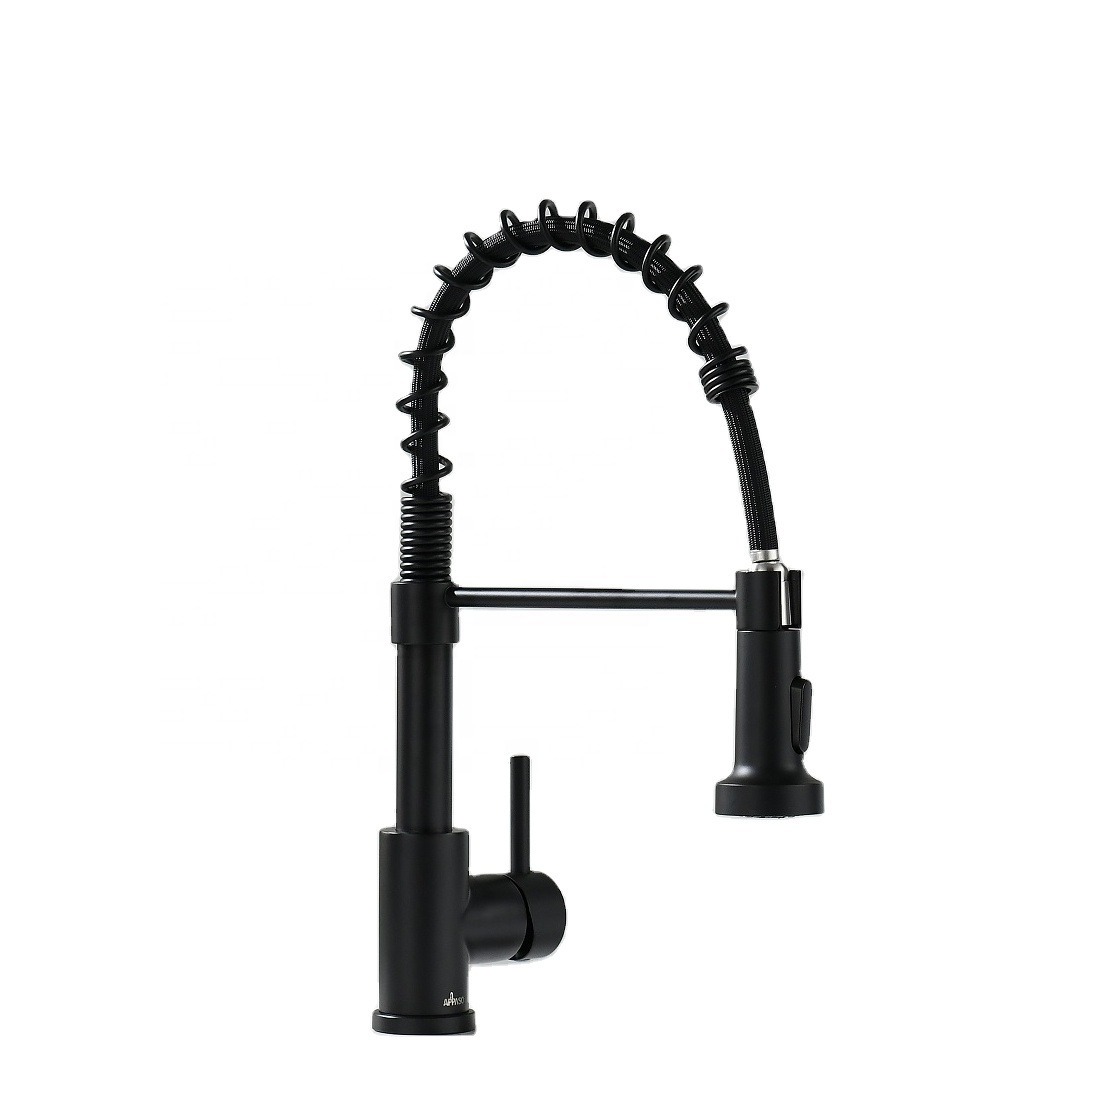 Contemporary Kitchen Sink Faucets Mixer Tap Spring Flexible Water Mixer Black Kitchen